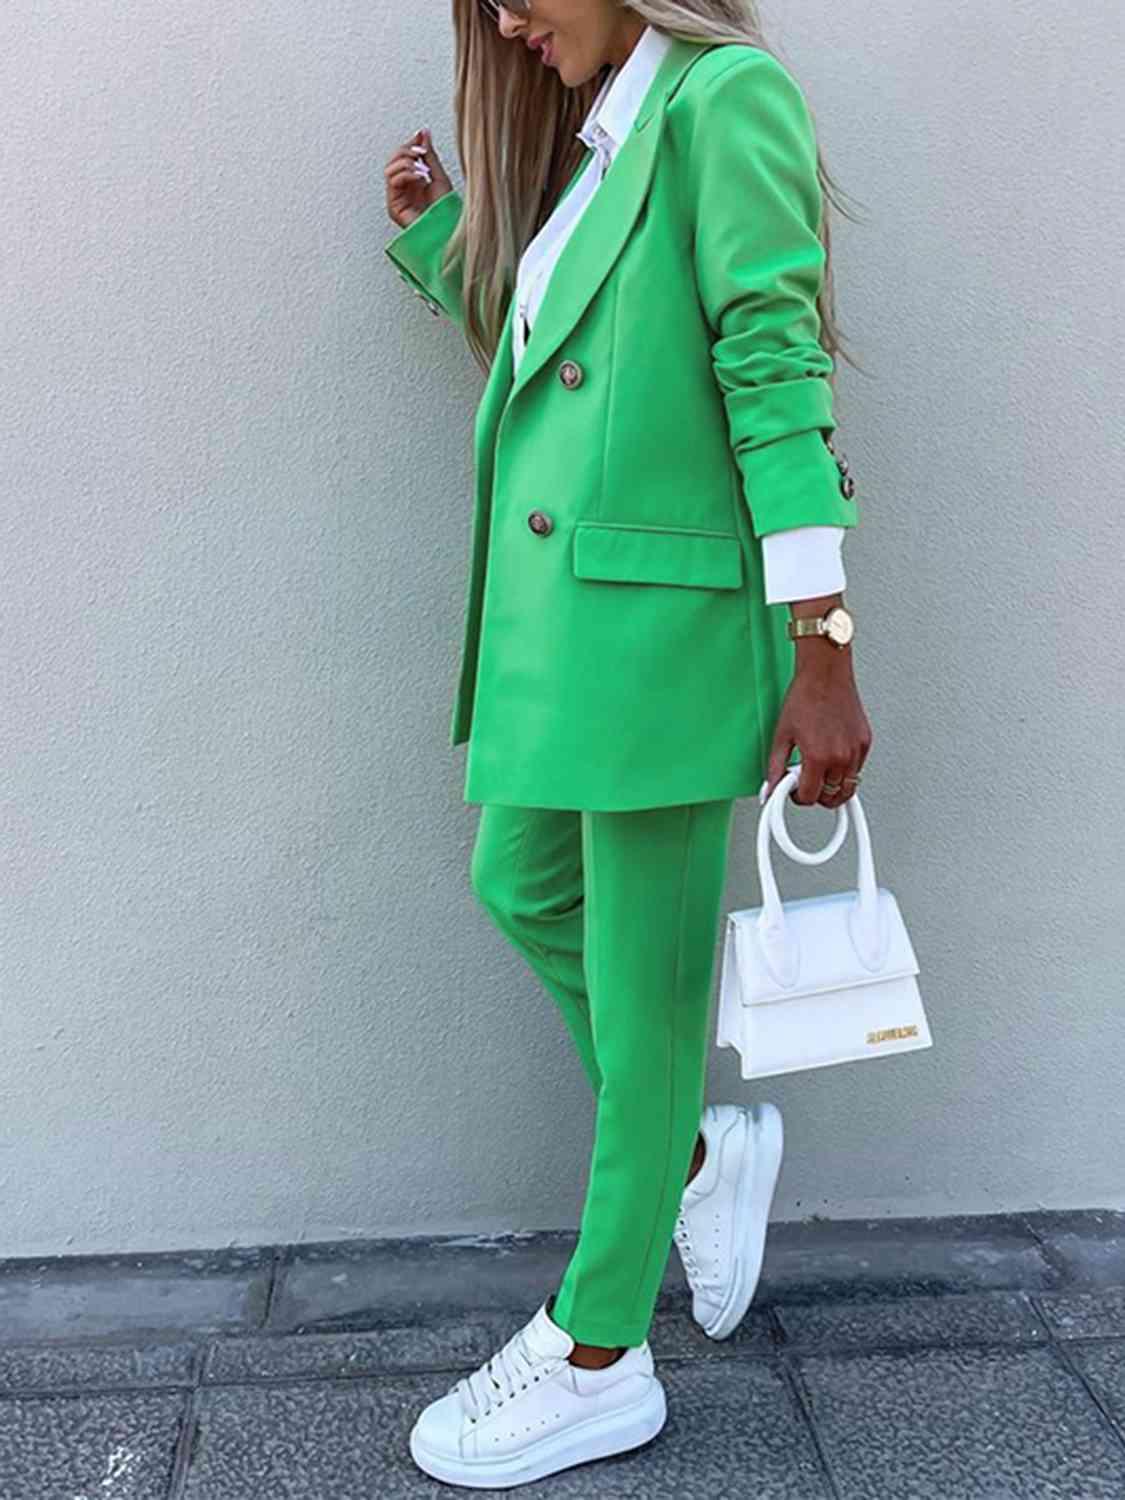 a woman wearing a green suit and white shoes